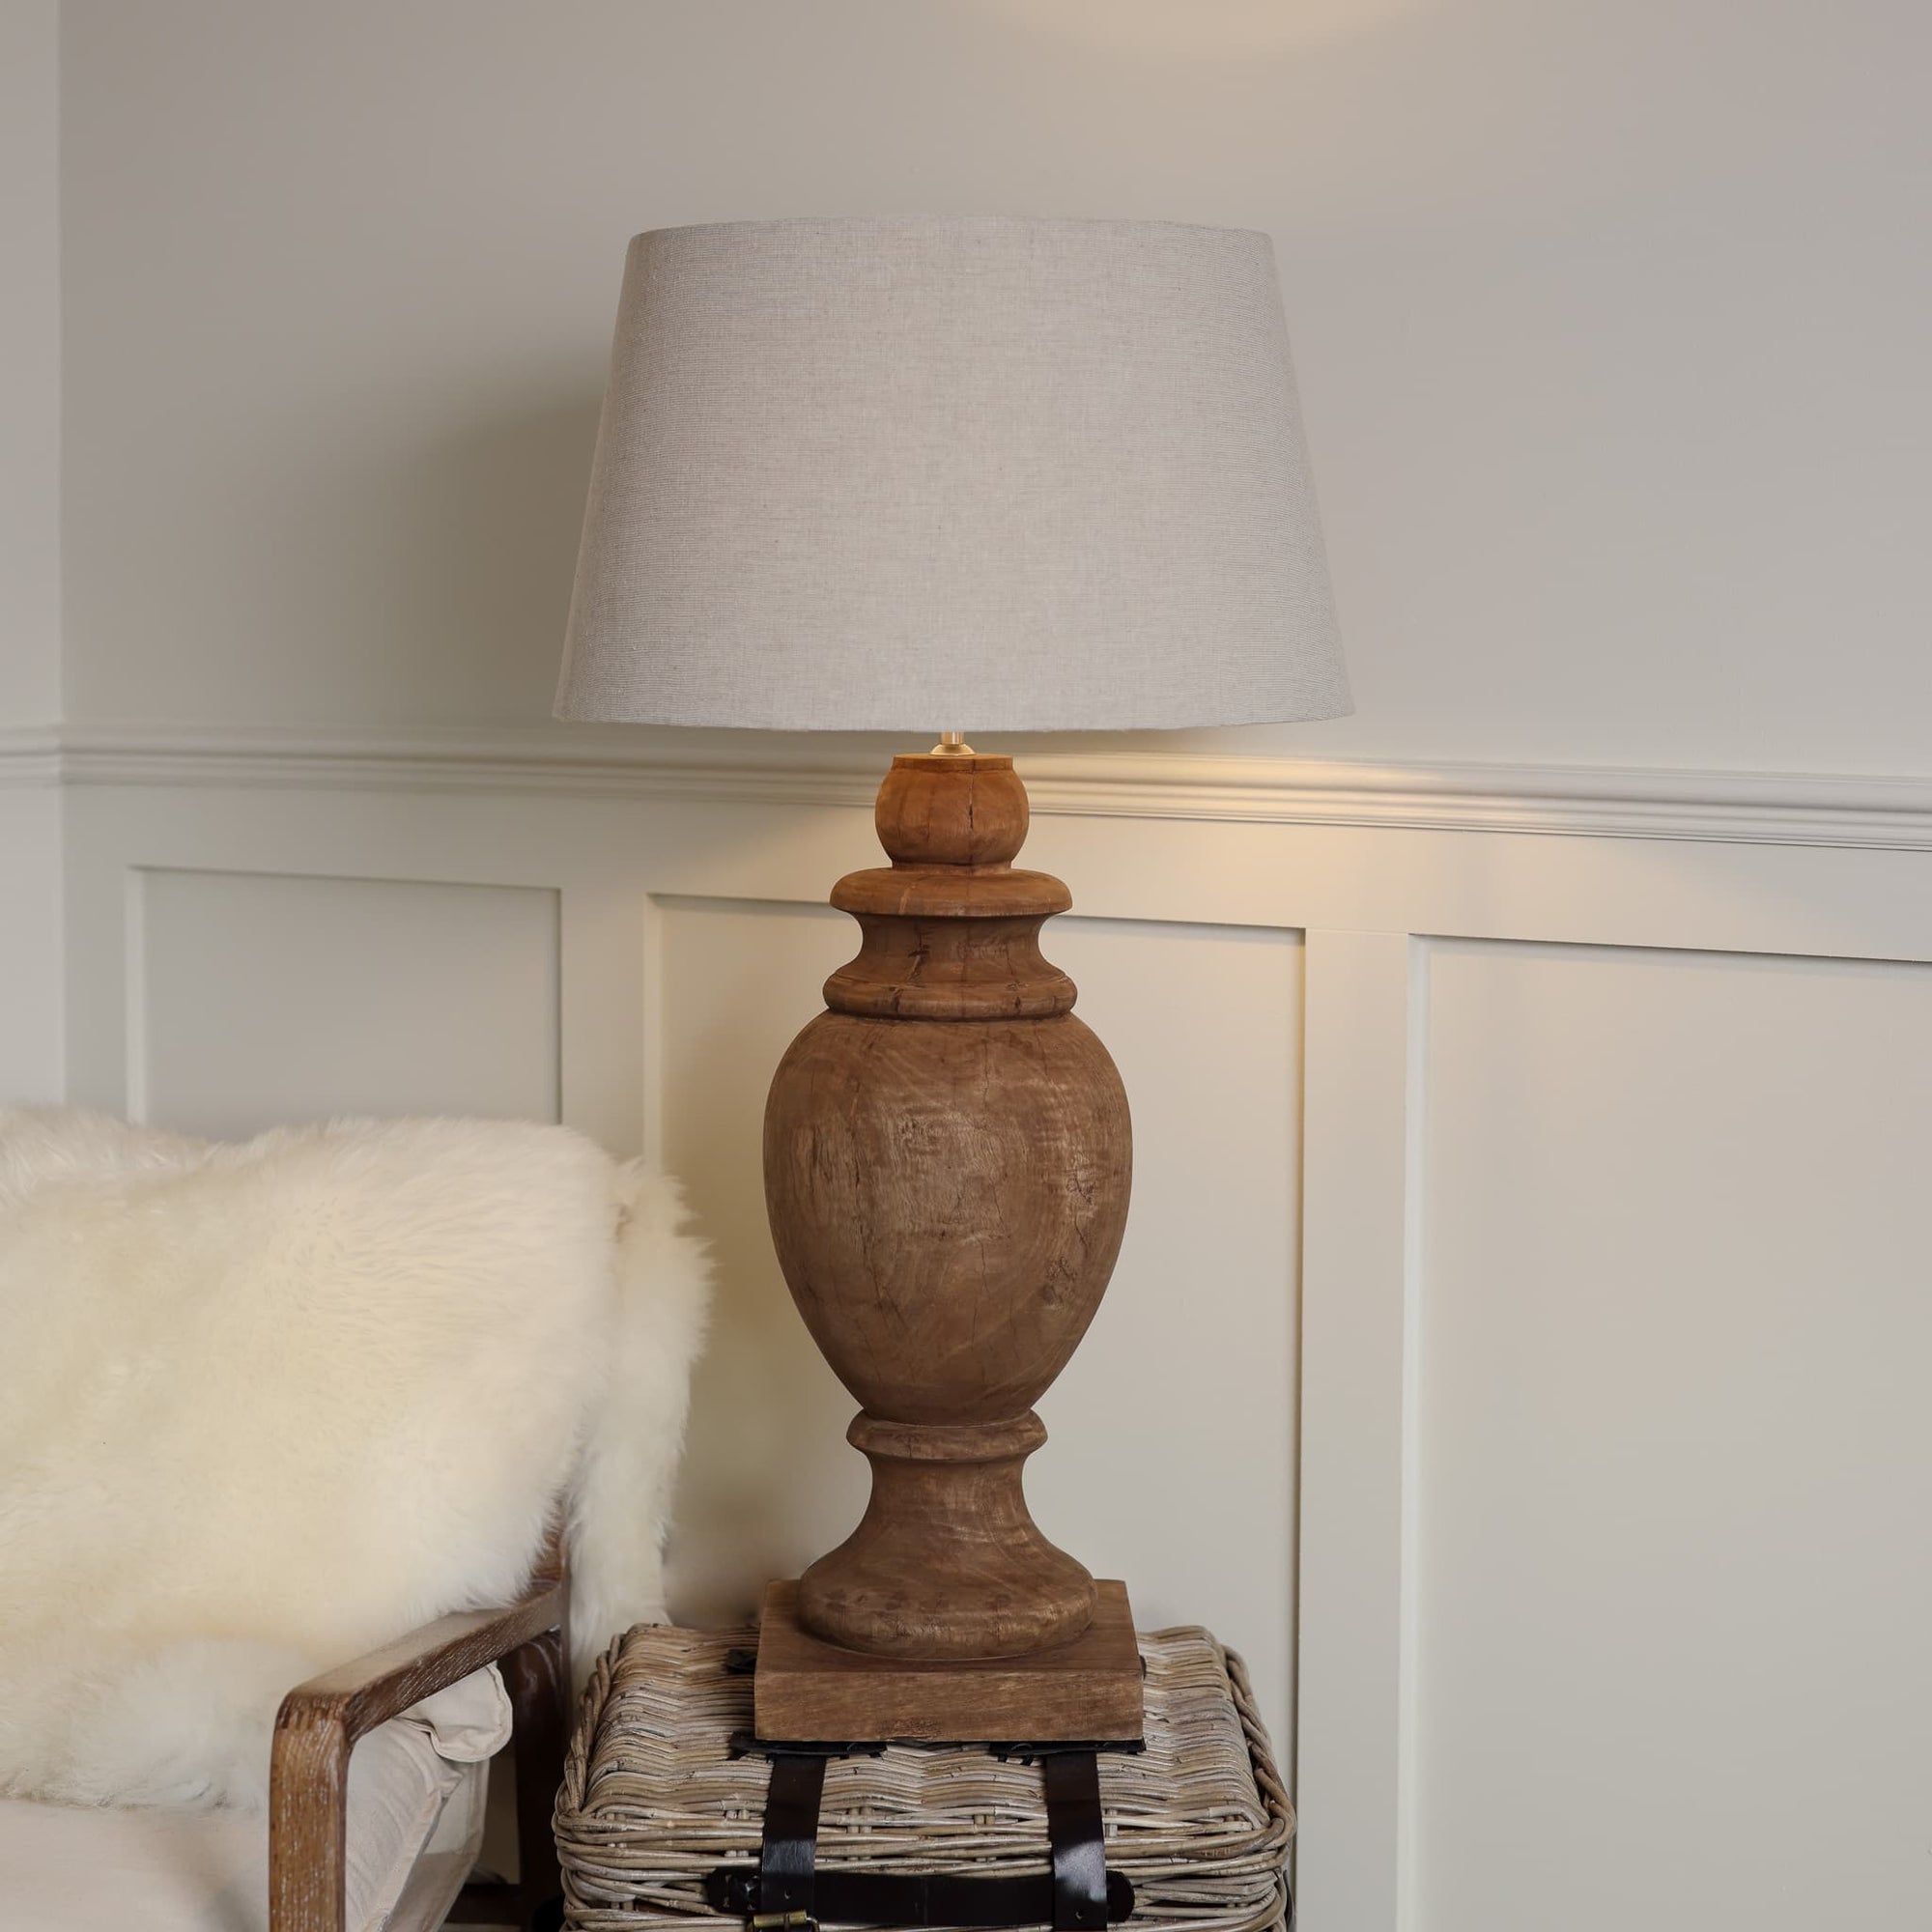 Tall wooden table lamp lit with neutral shade, lit on side table.